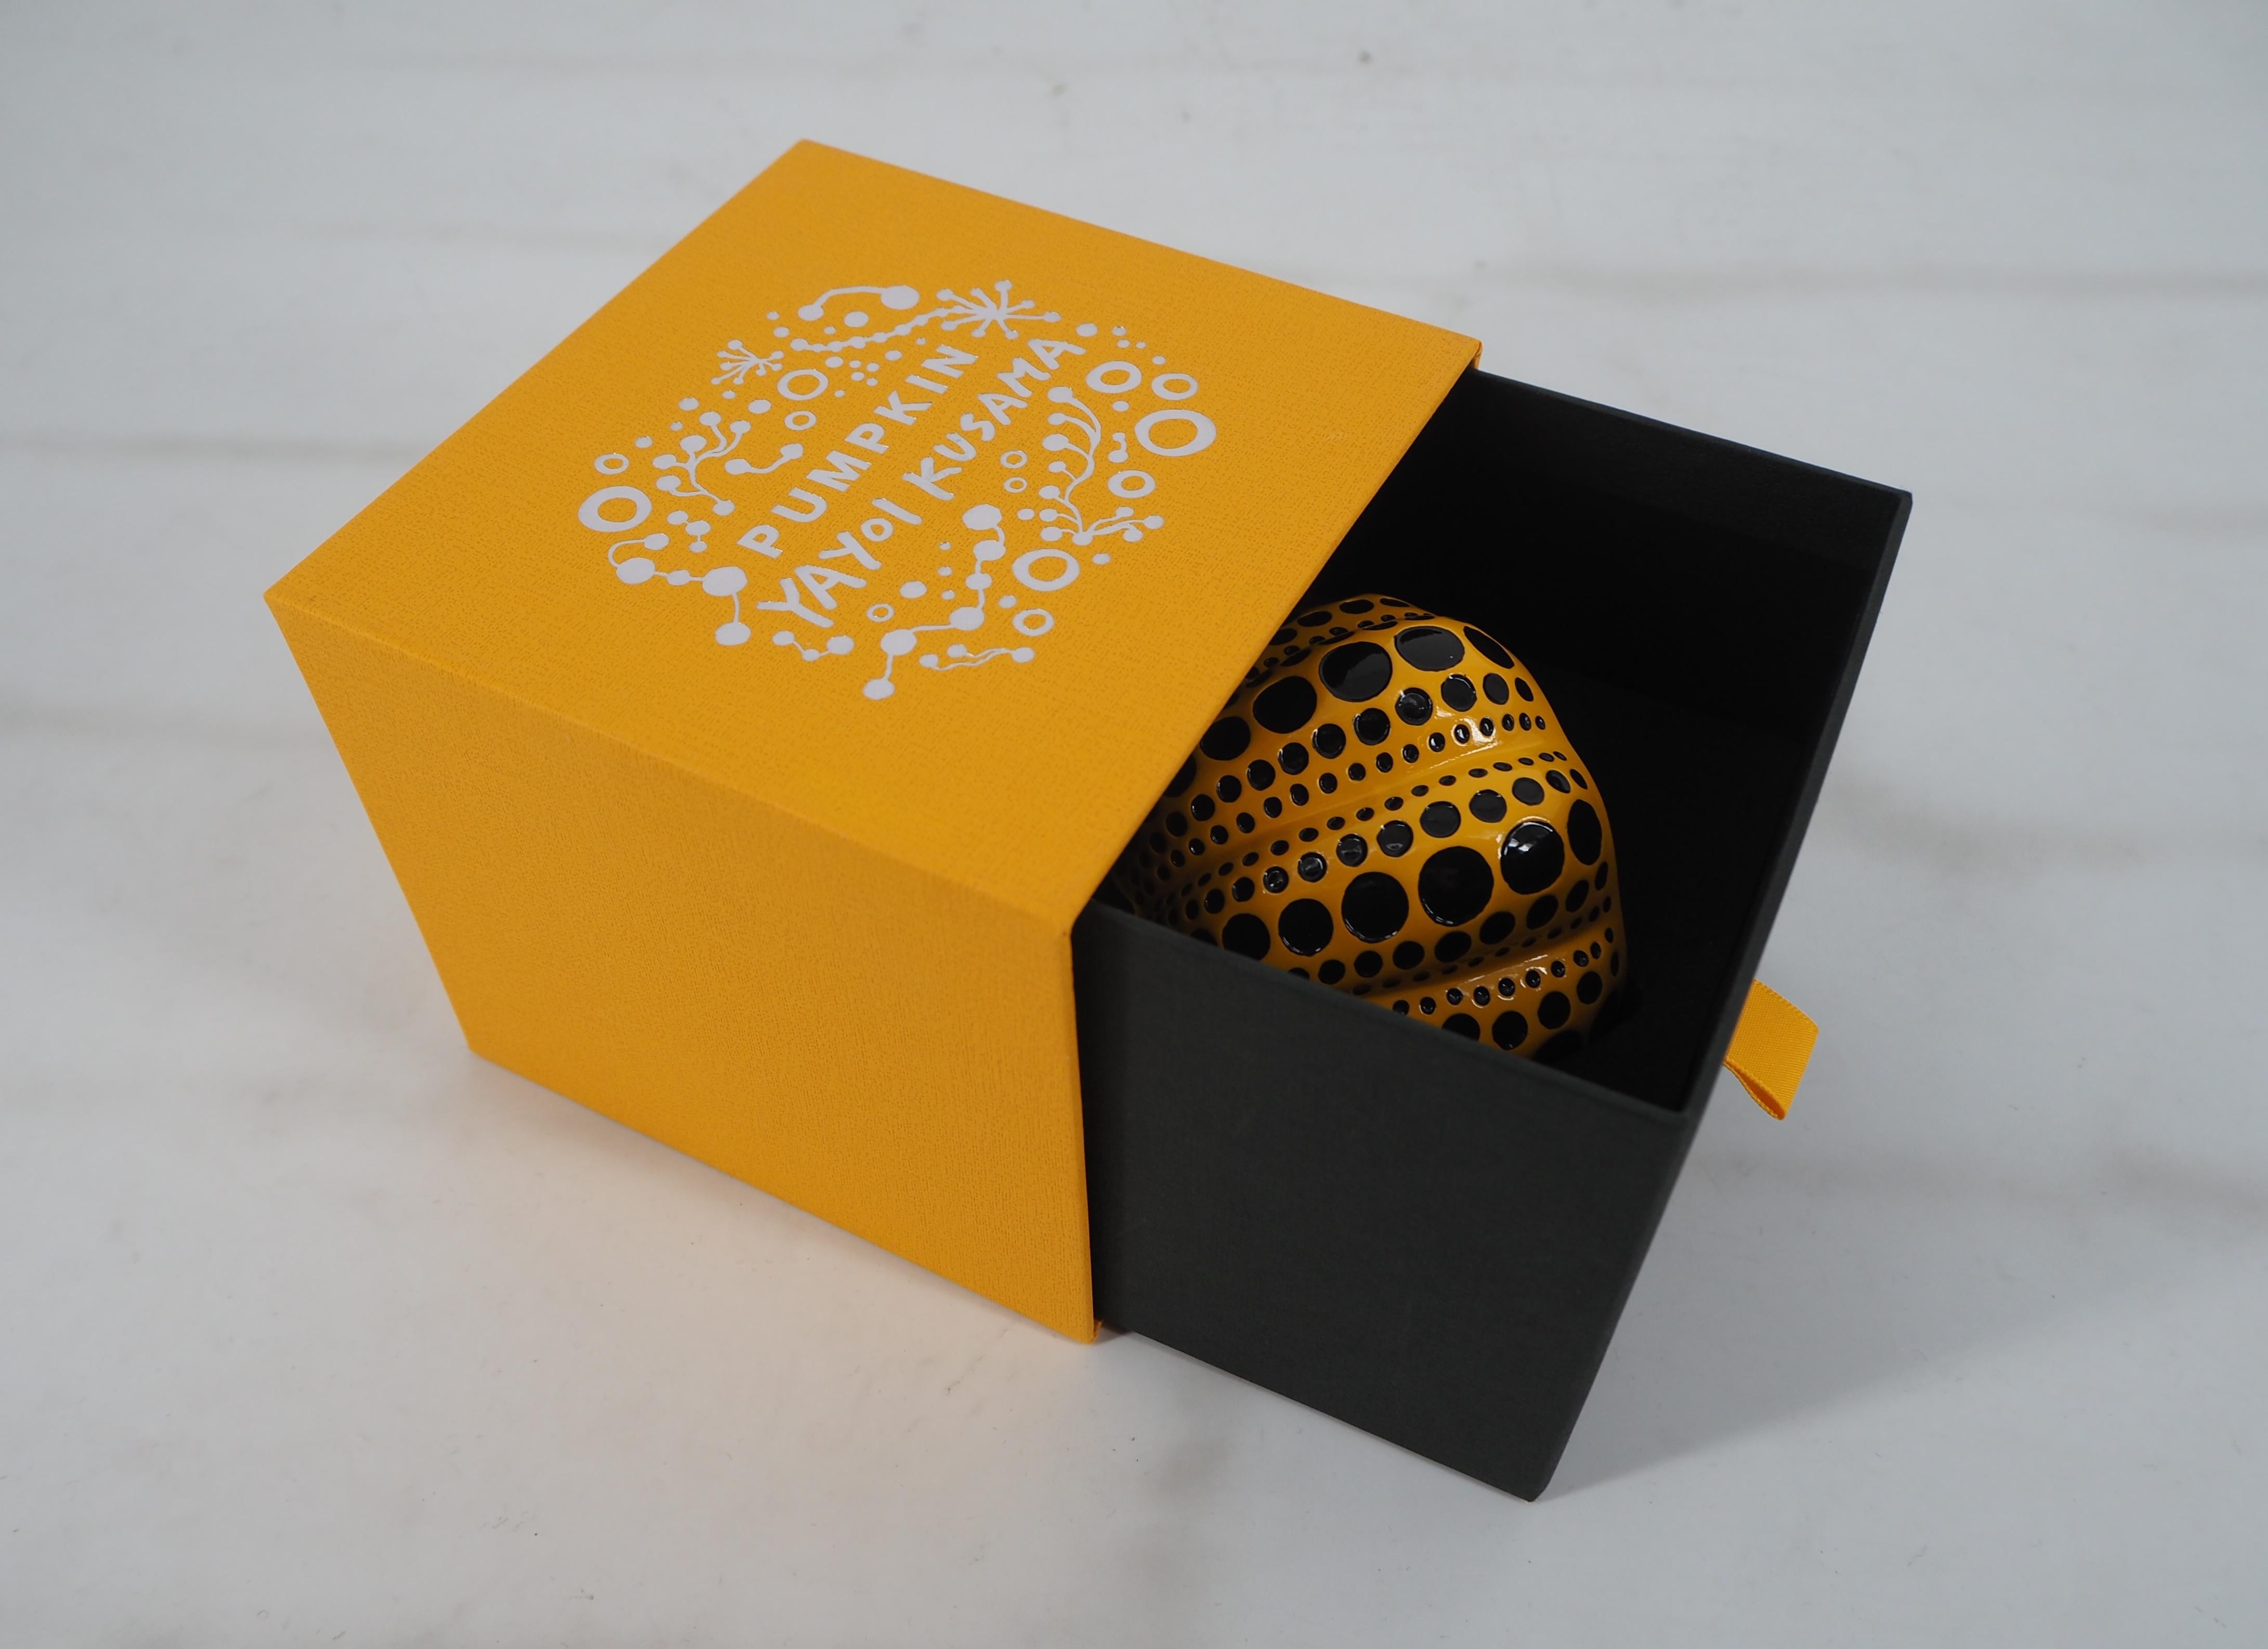 Yellow Pumpkin (Dot Obsession) - Original sculpture with original case - Contemporary Sculpture by Yayoi Kusama